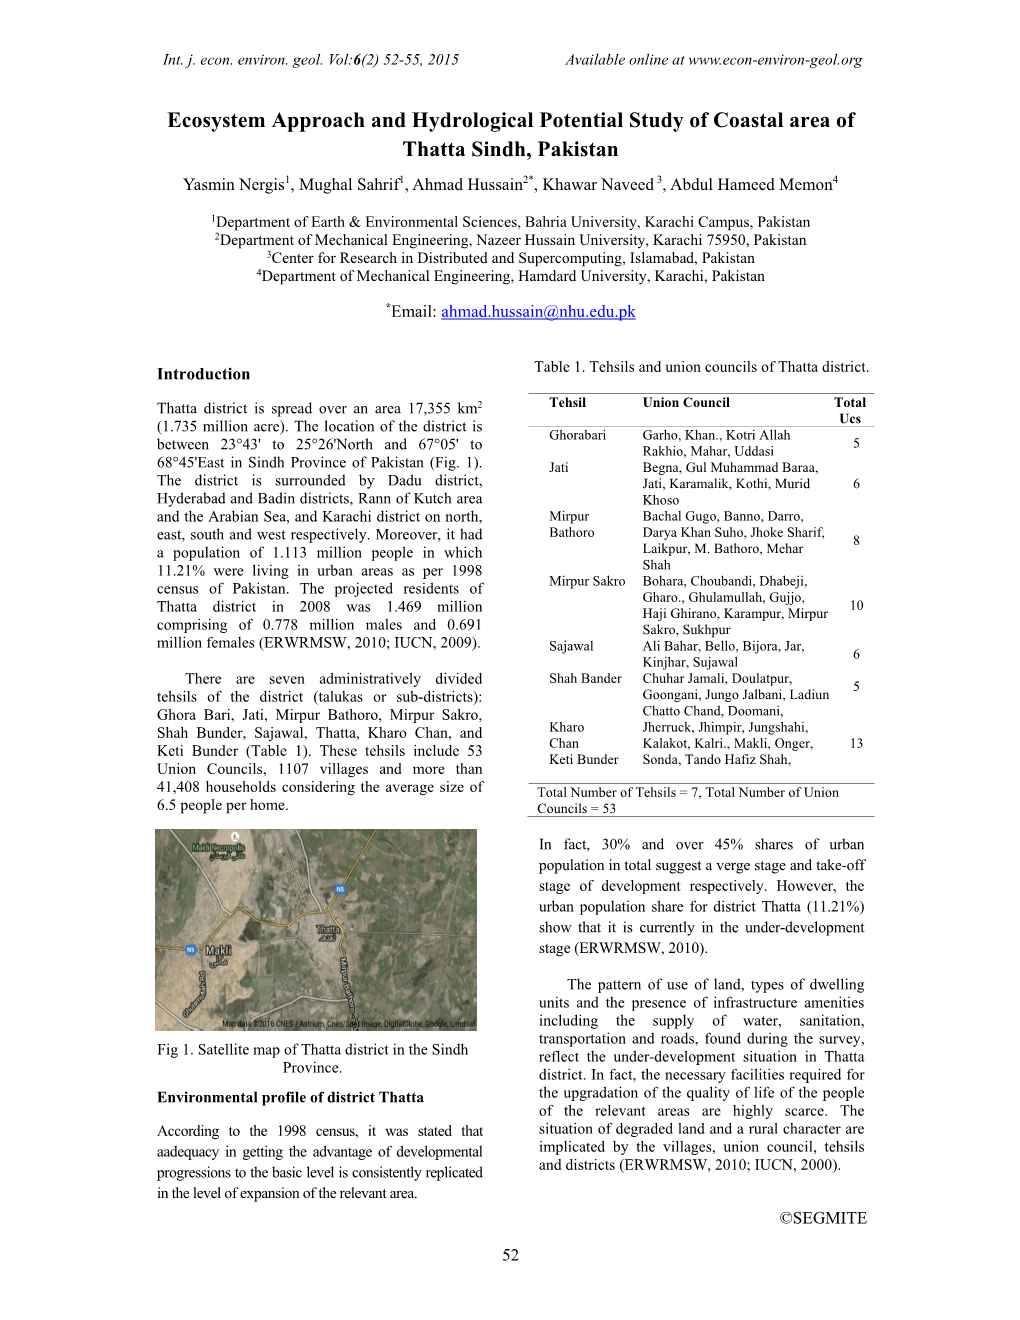 Ecosystem Approach and Hydrological Potential Study Of